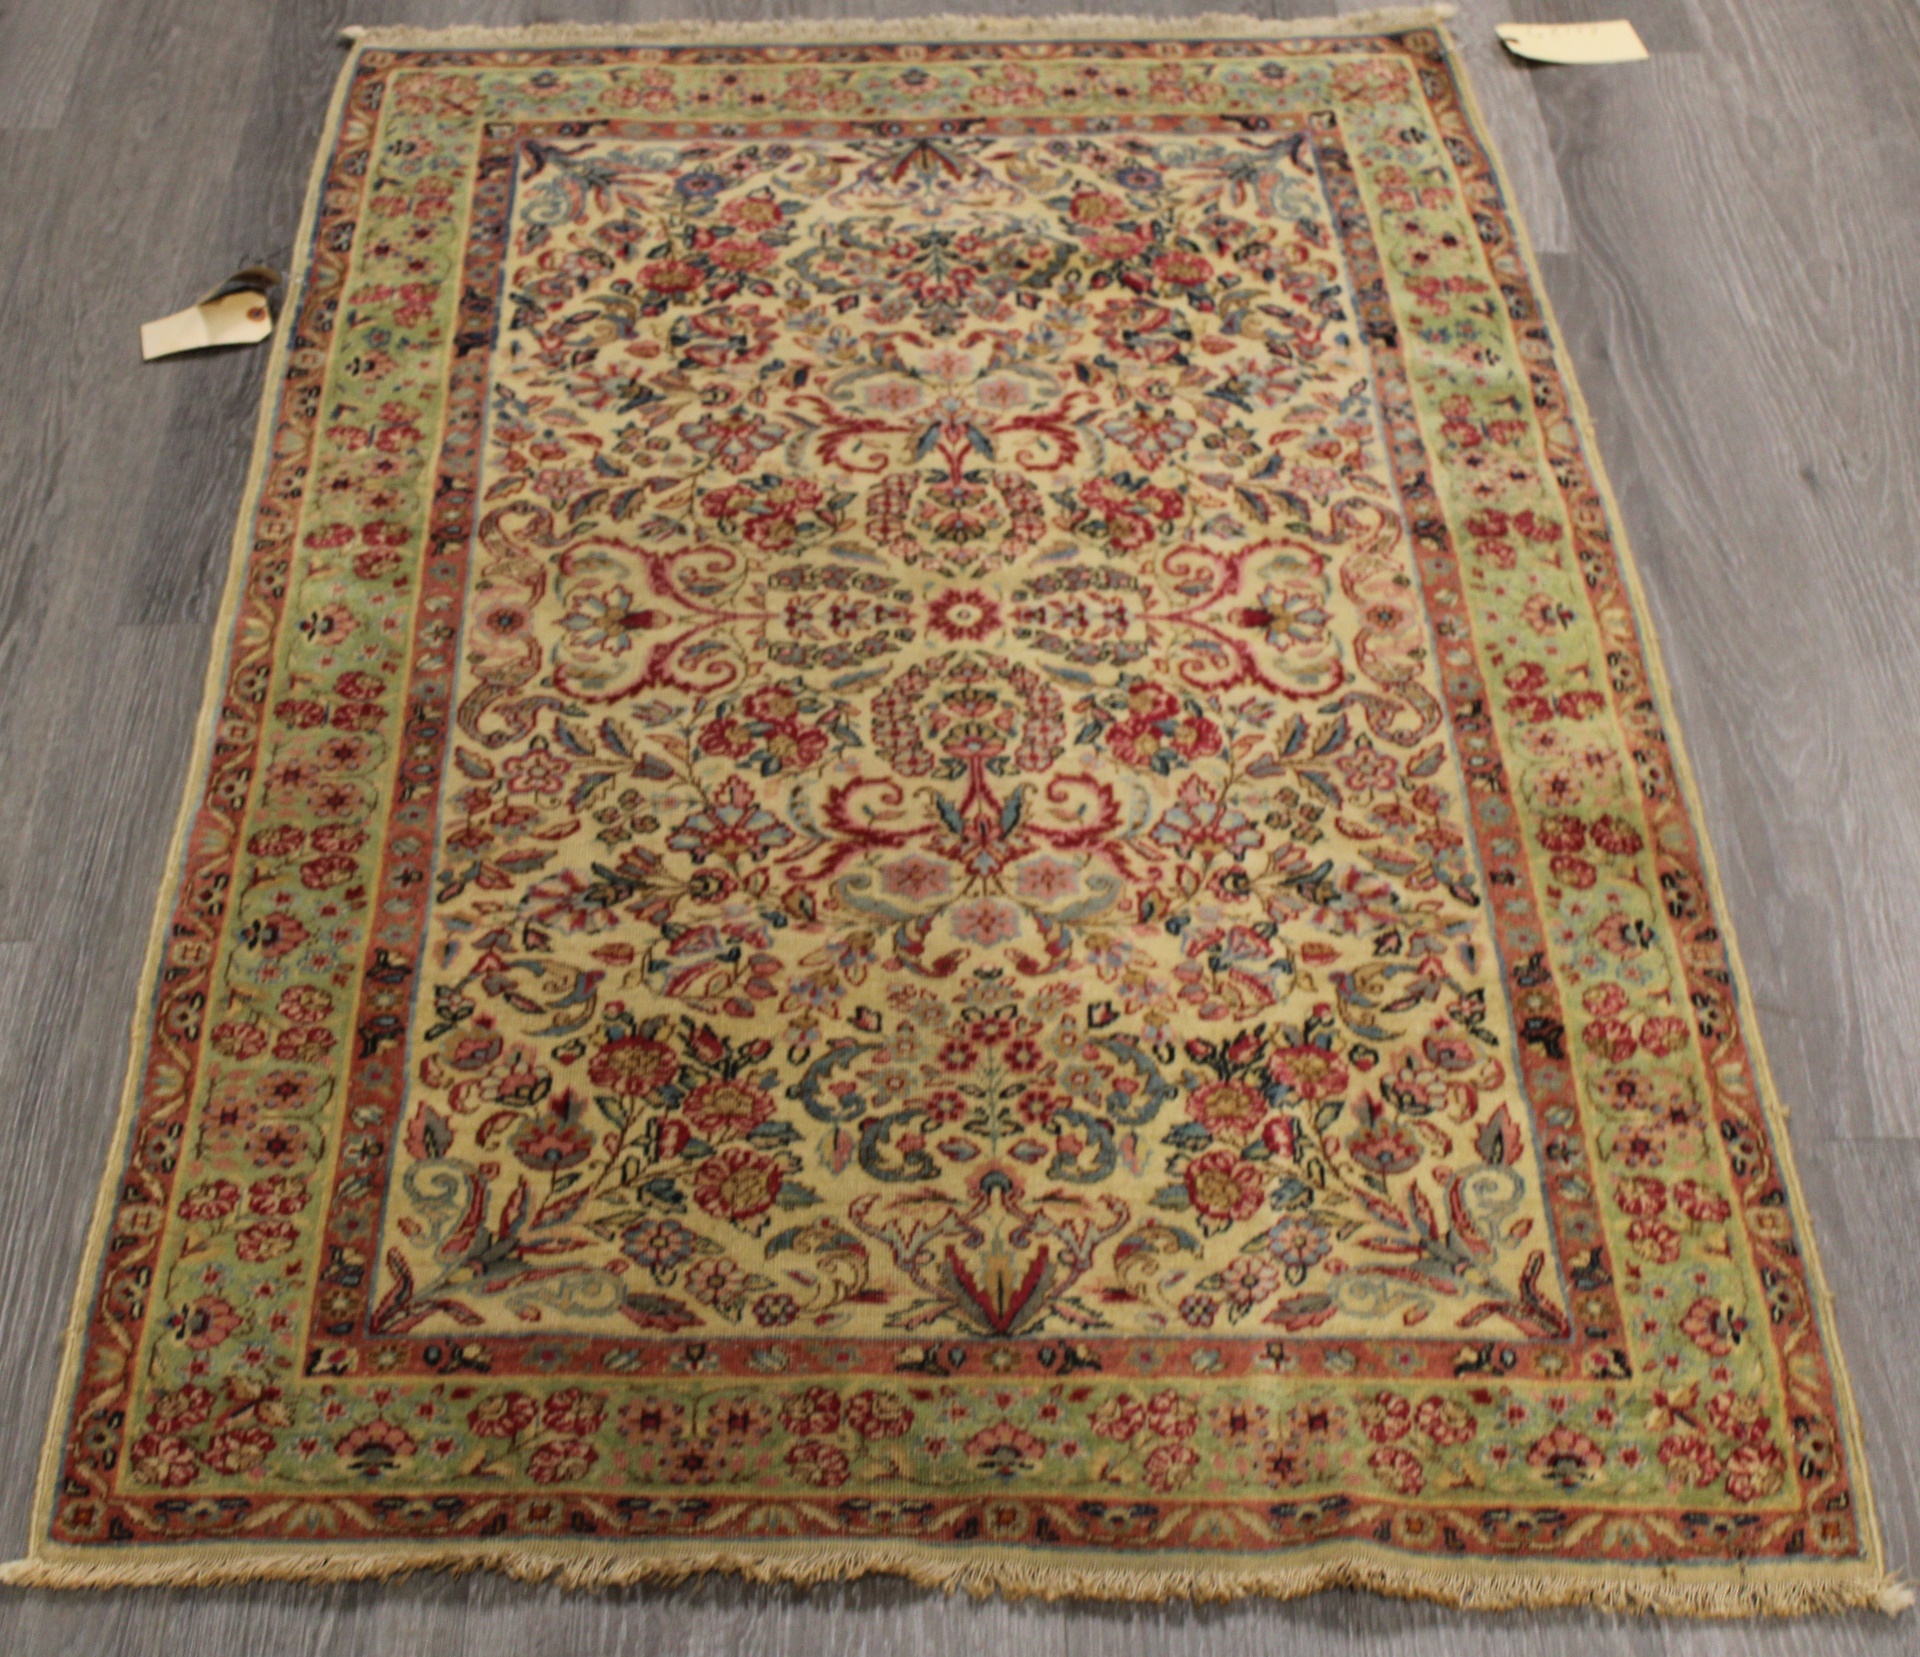 ANTIQUE AND FINELY HAND WOVEN CARPET  3b7bf4